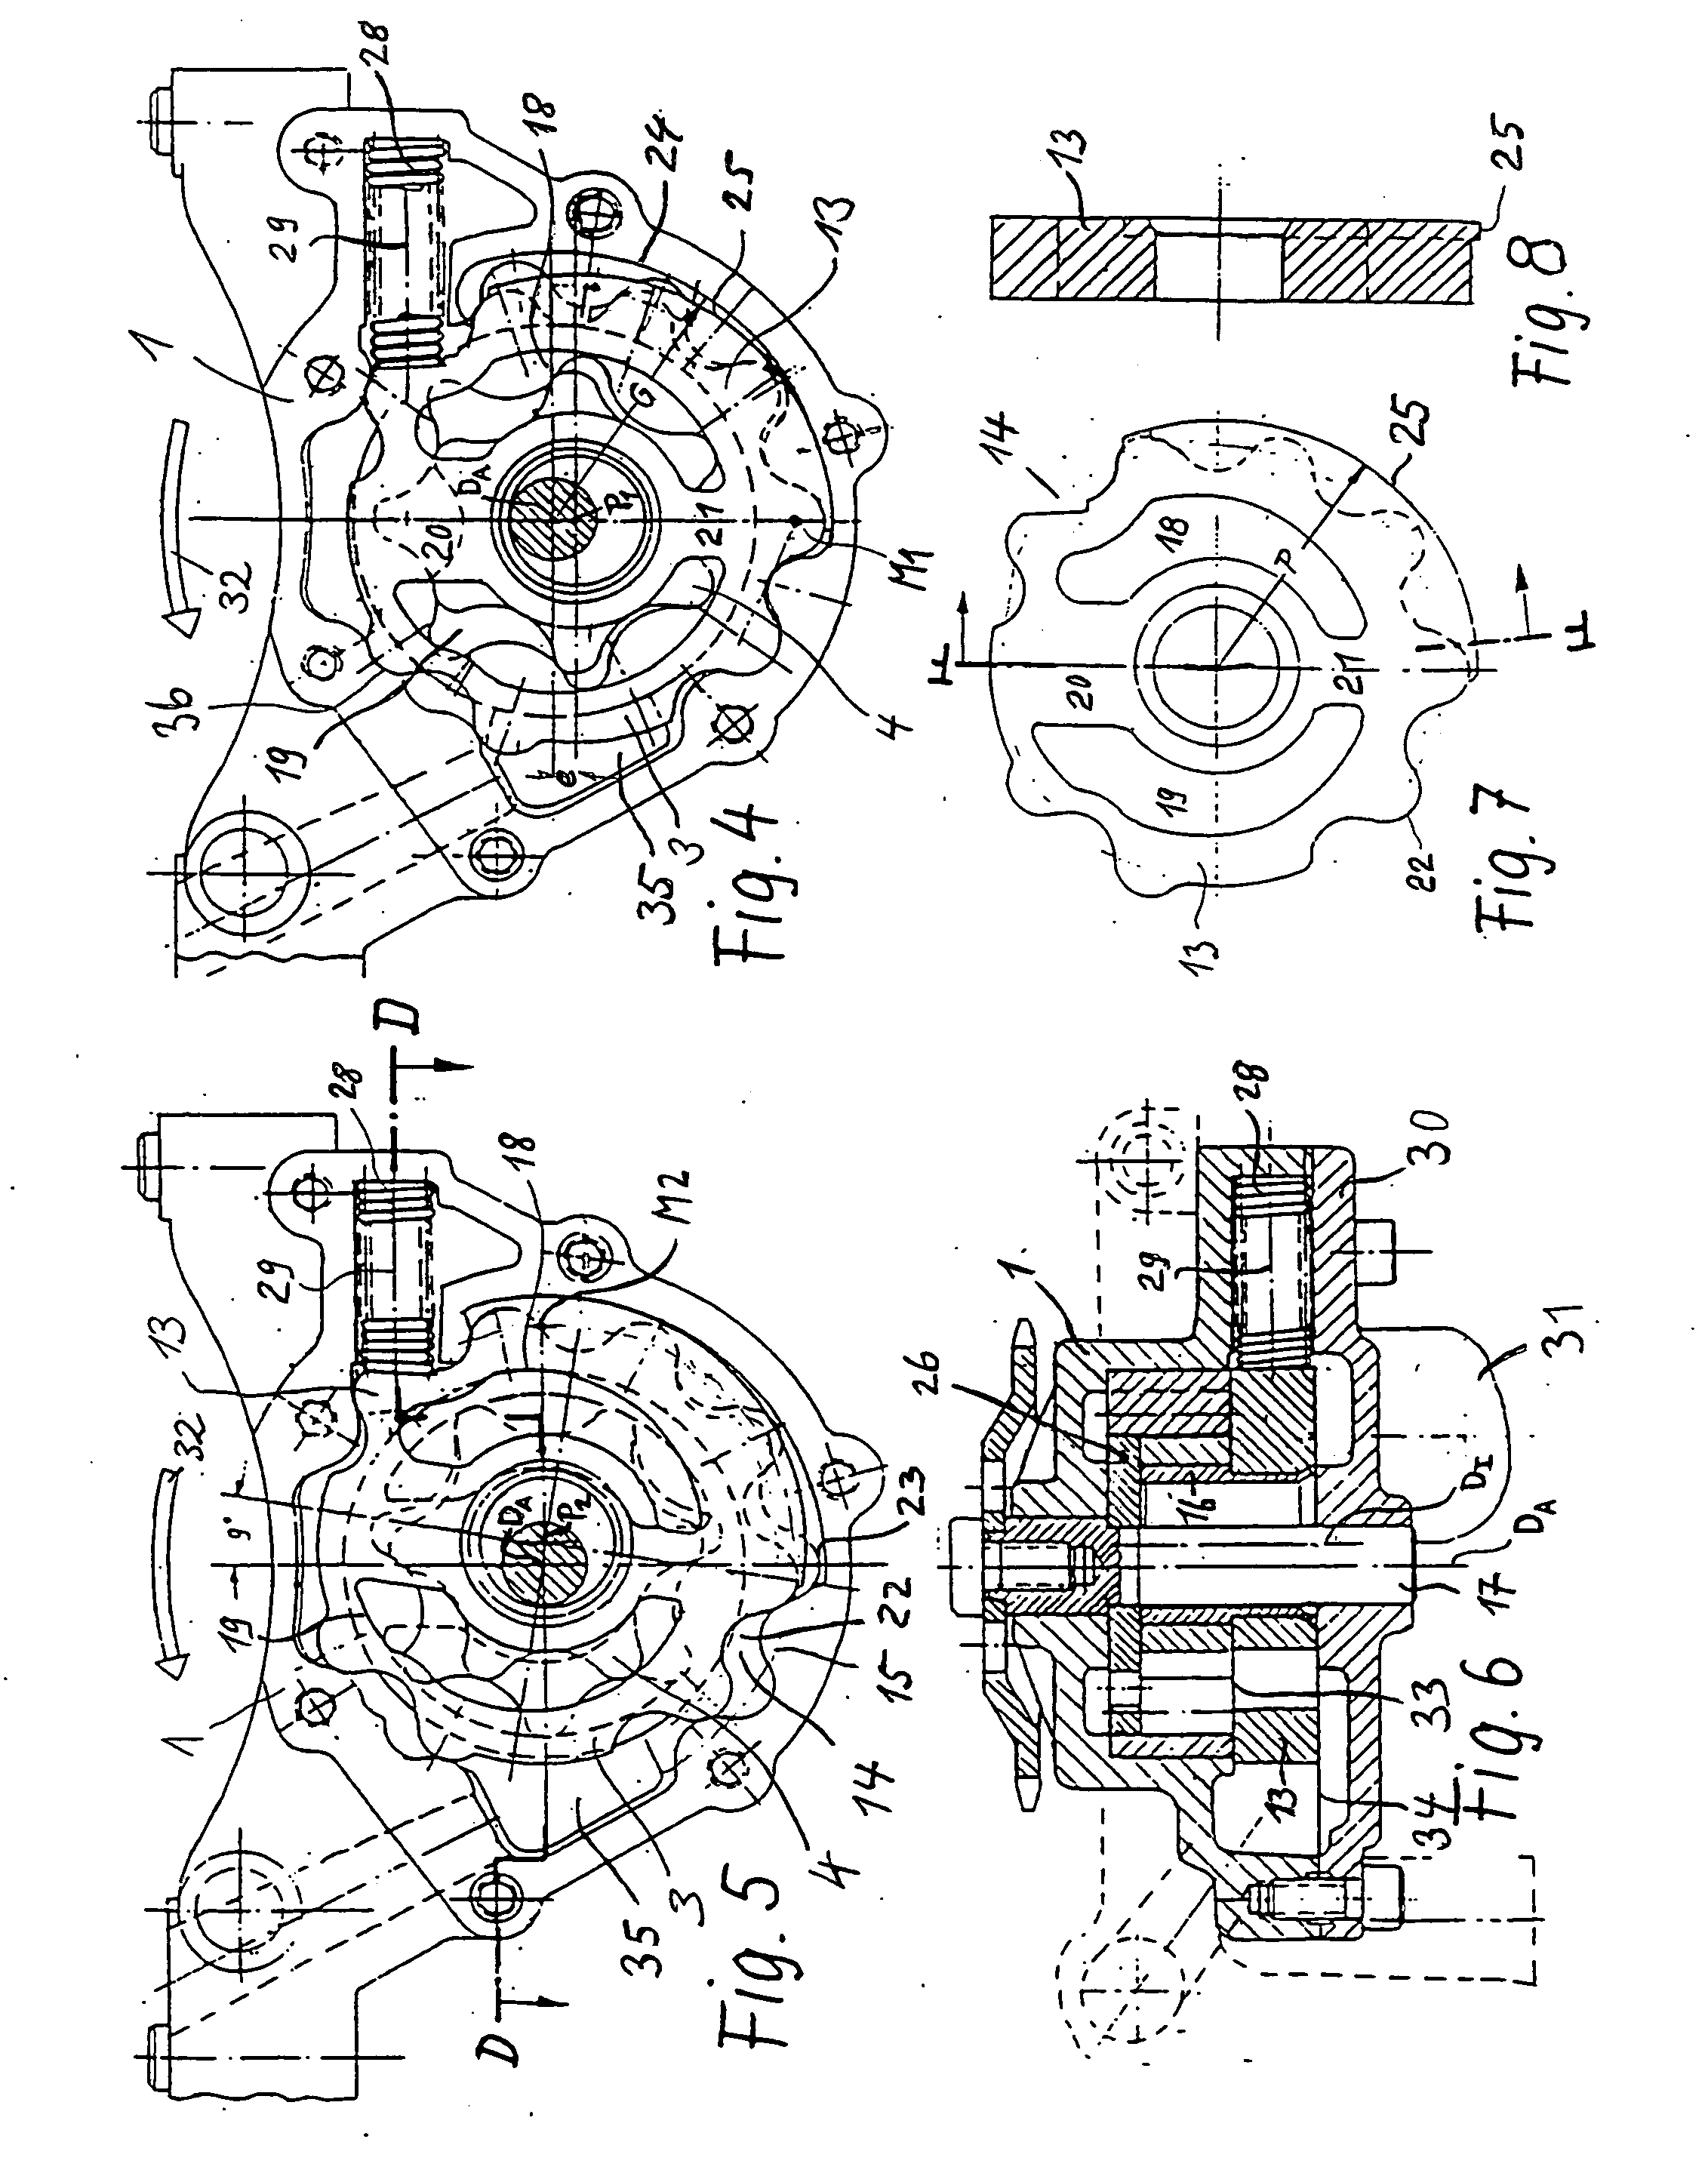 Displacement pump with variable volume flow